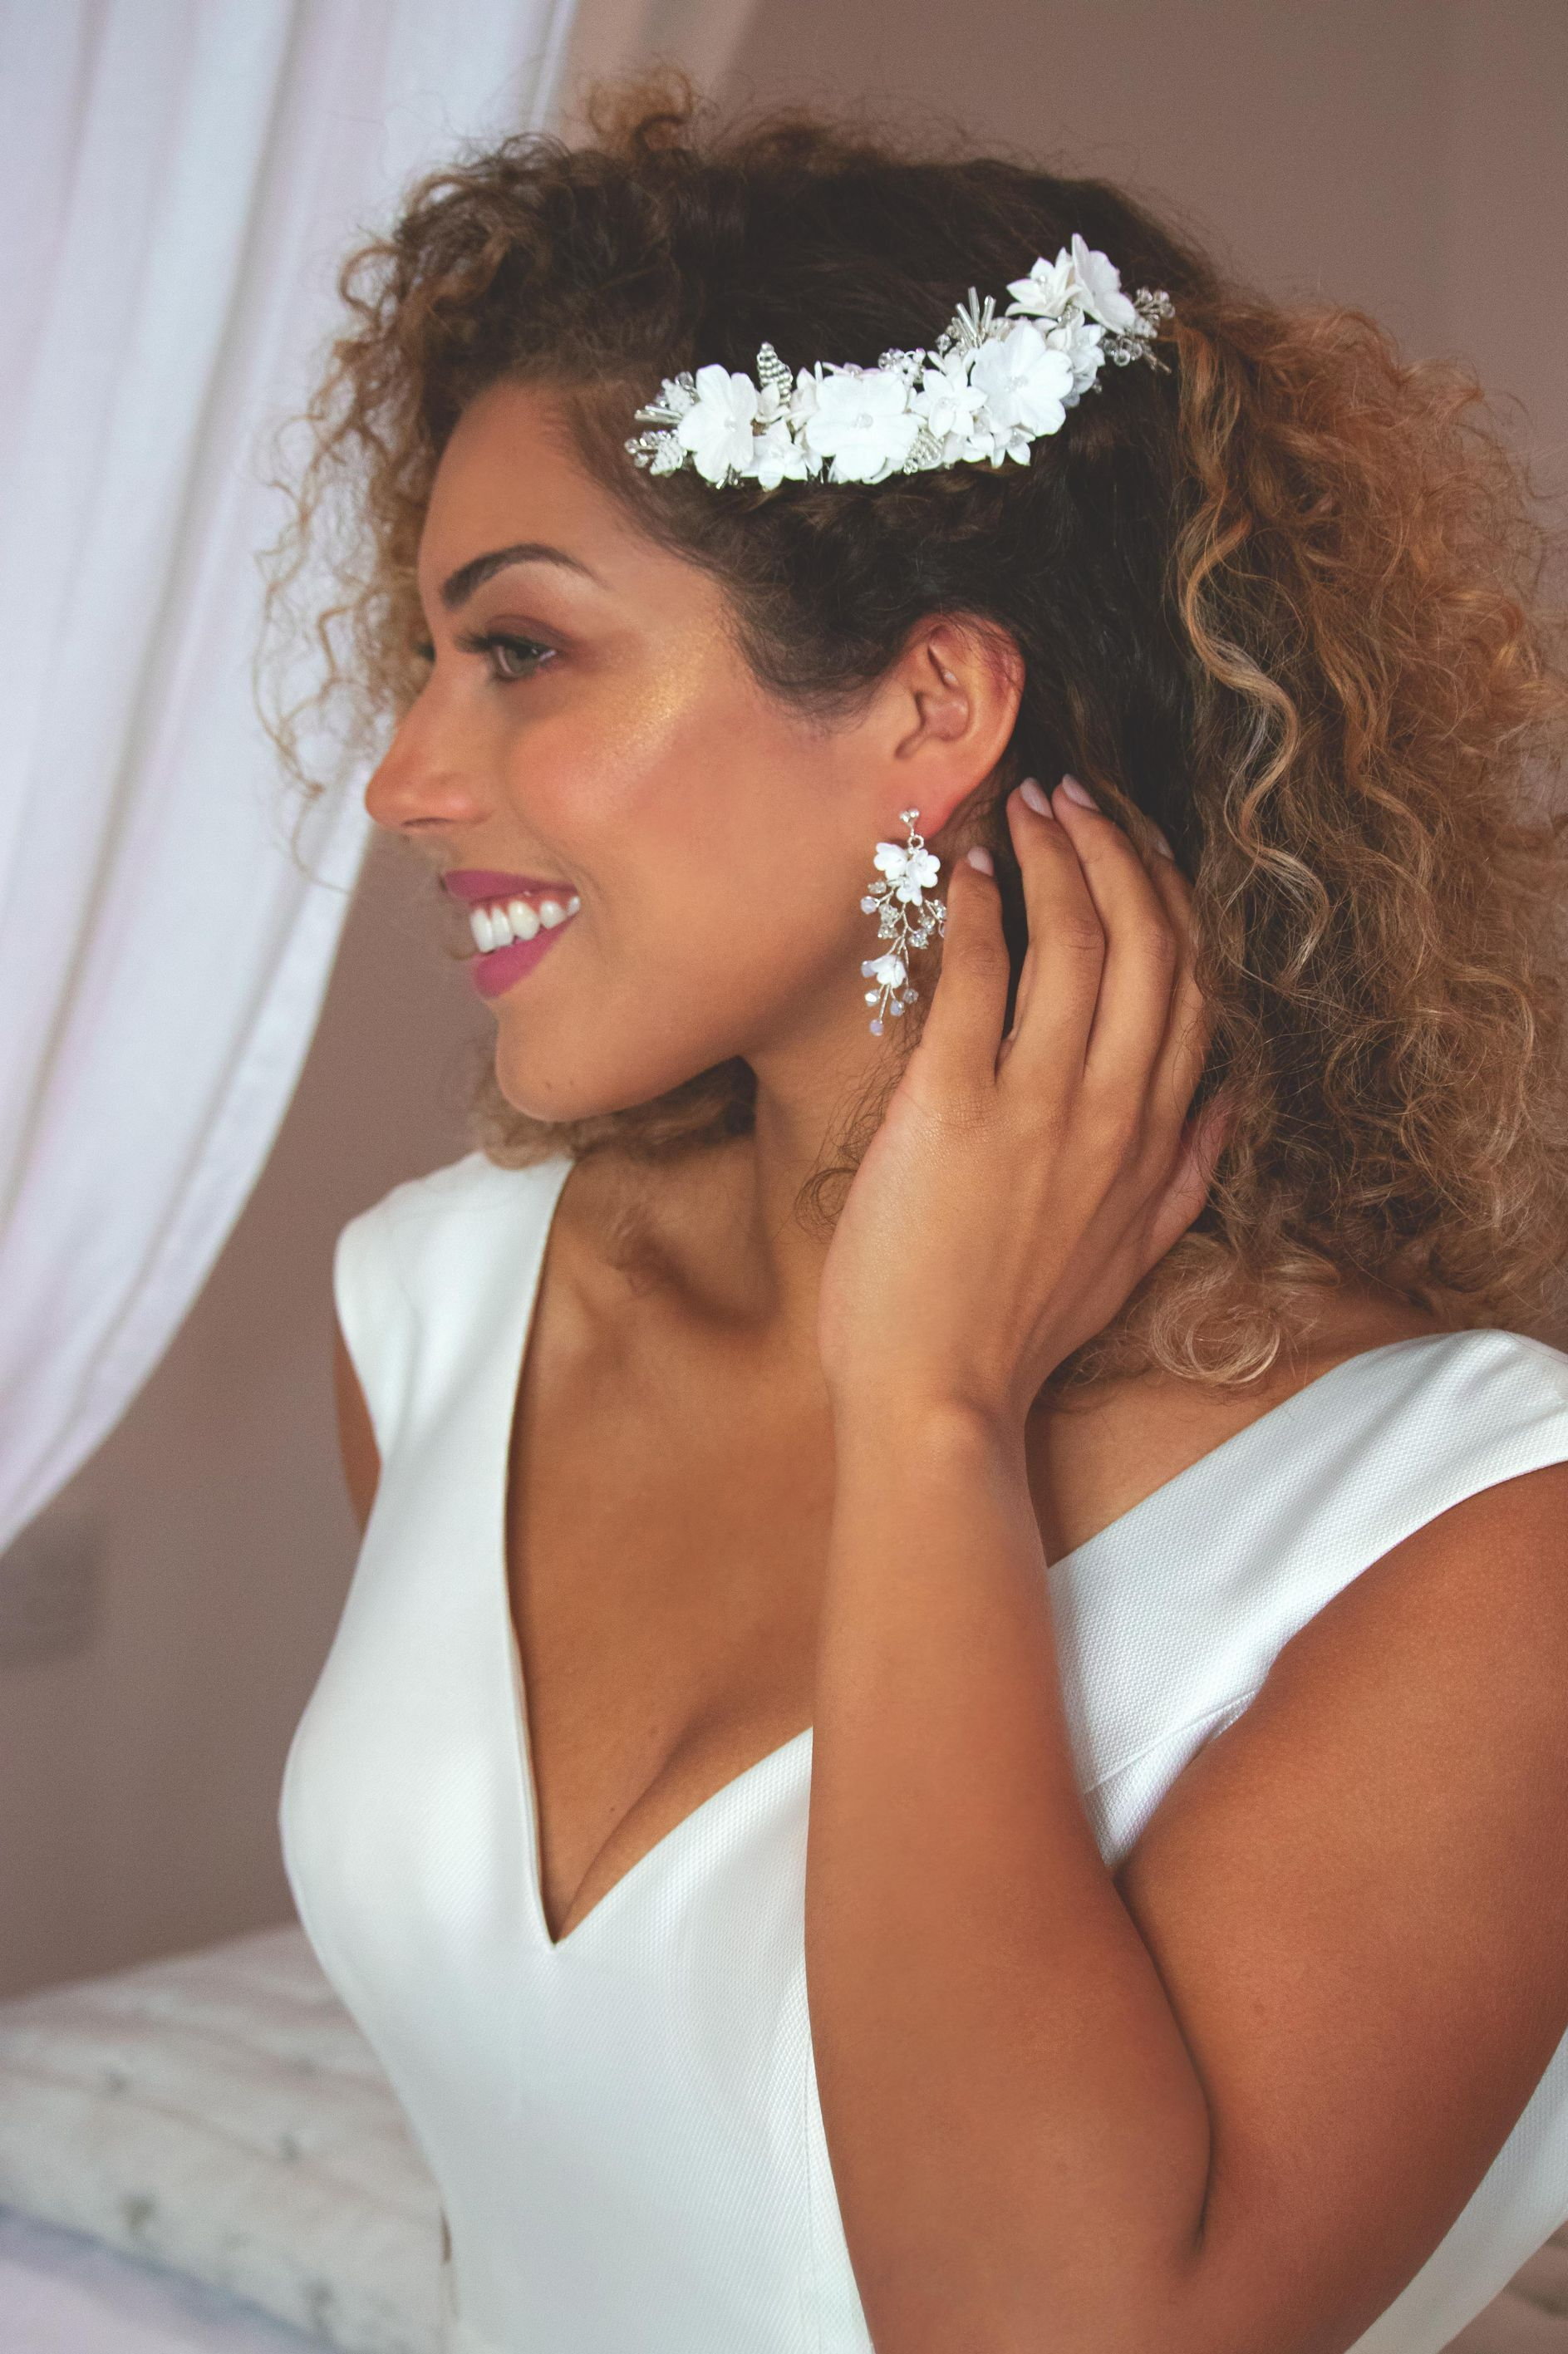 Mixed raced bride in white dress smiling with hand to her ear